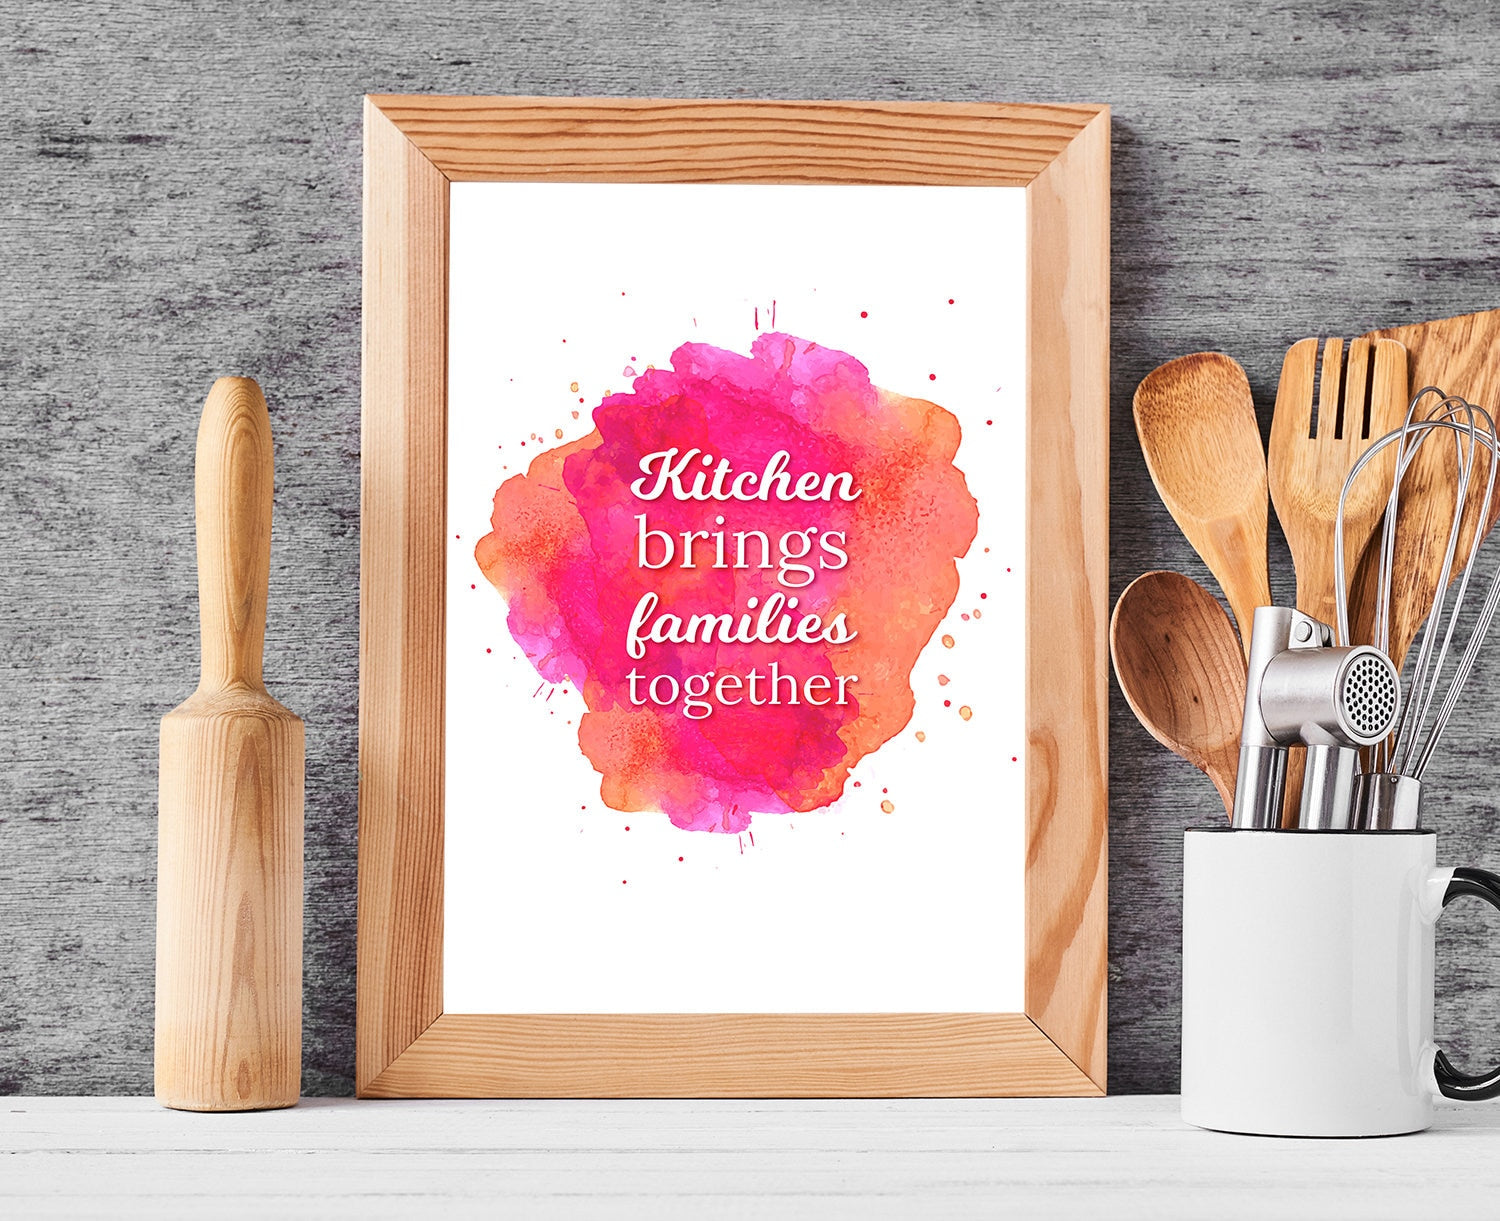 Kitchen brings families together, Kitchen Quote, Family Quote, Kitchen wall art, Kitchen wall decor, Kitchen poster, Family room wall art